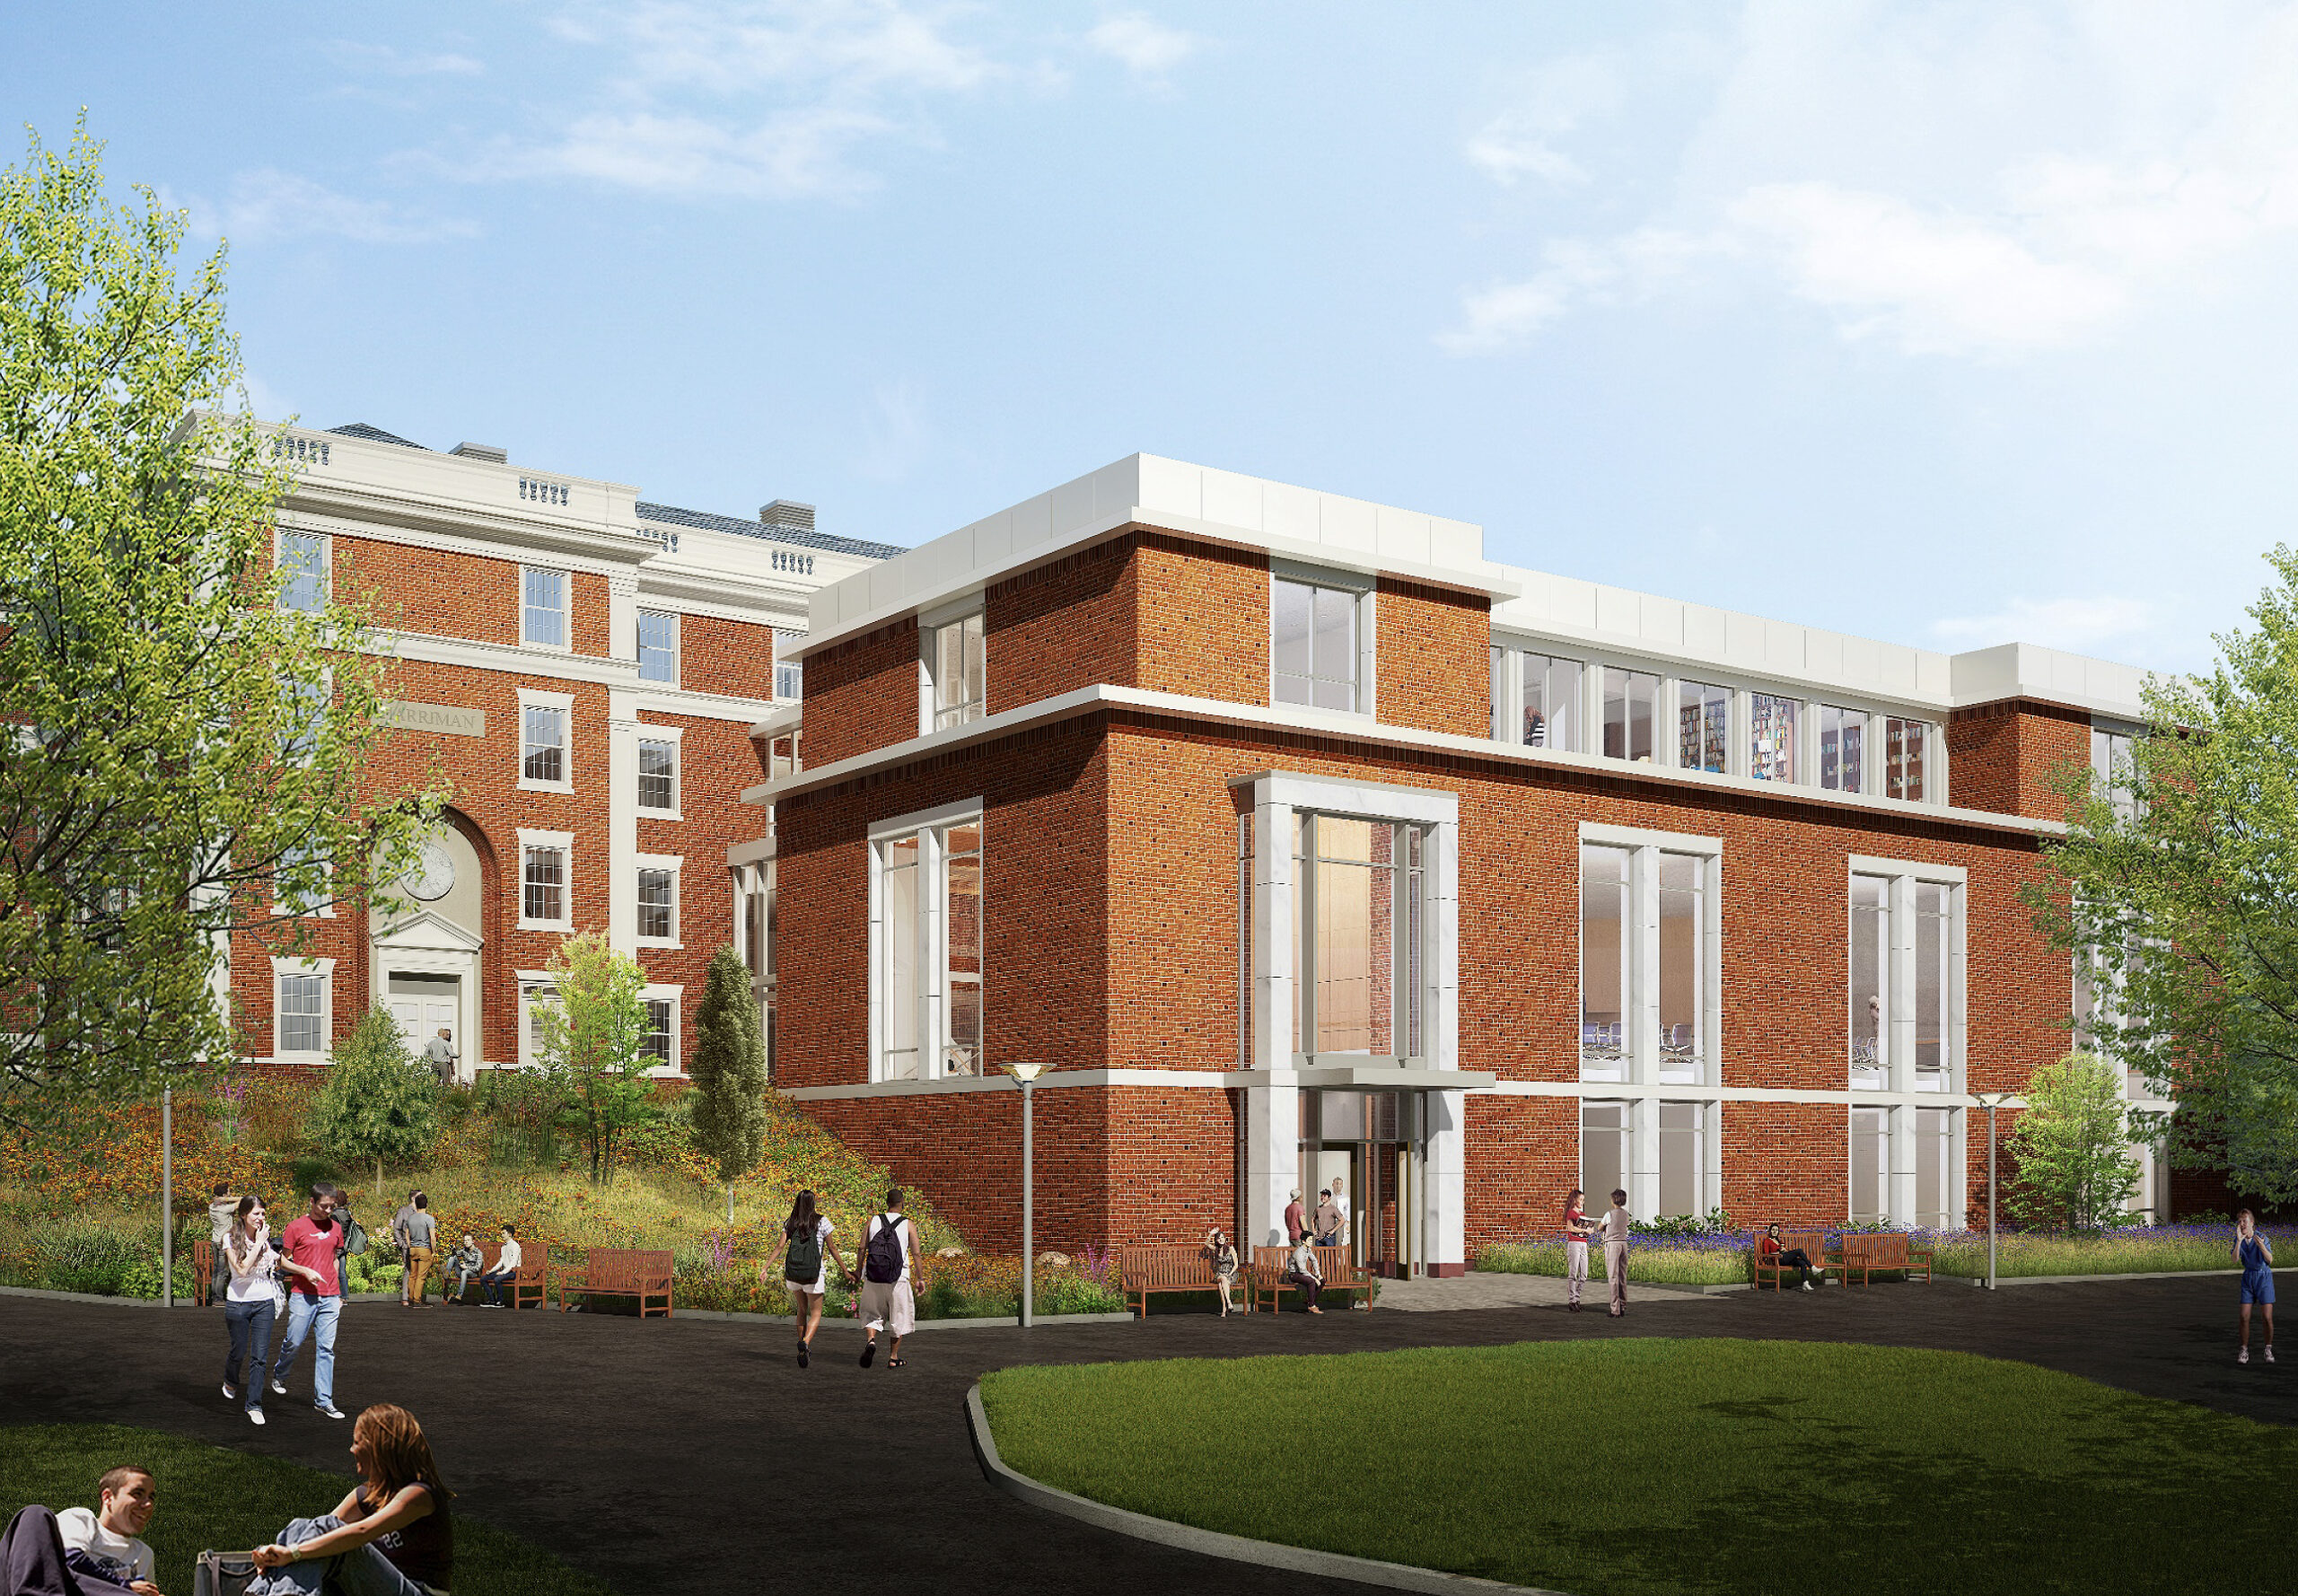 Construction of the new public affairs center will begin in June 2021. (Illustration courtesy of Newman Architects)